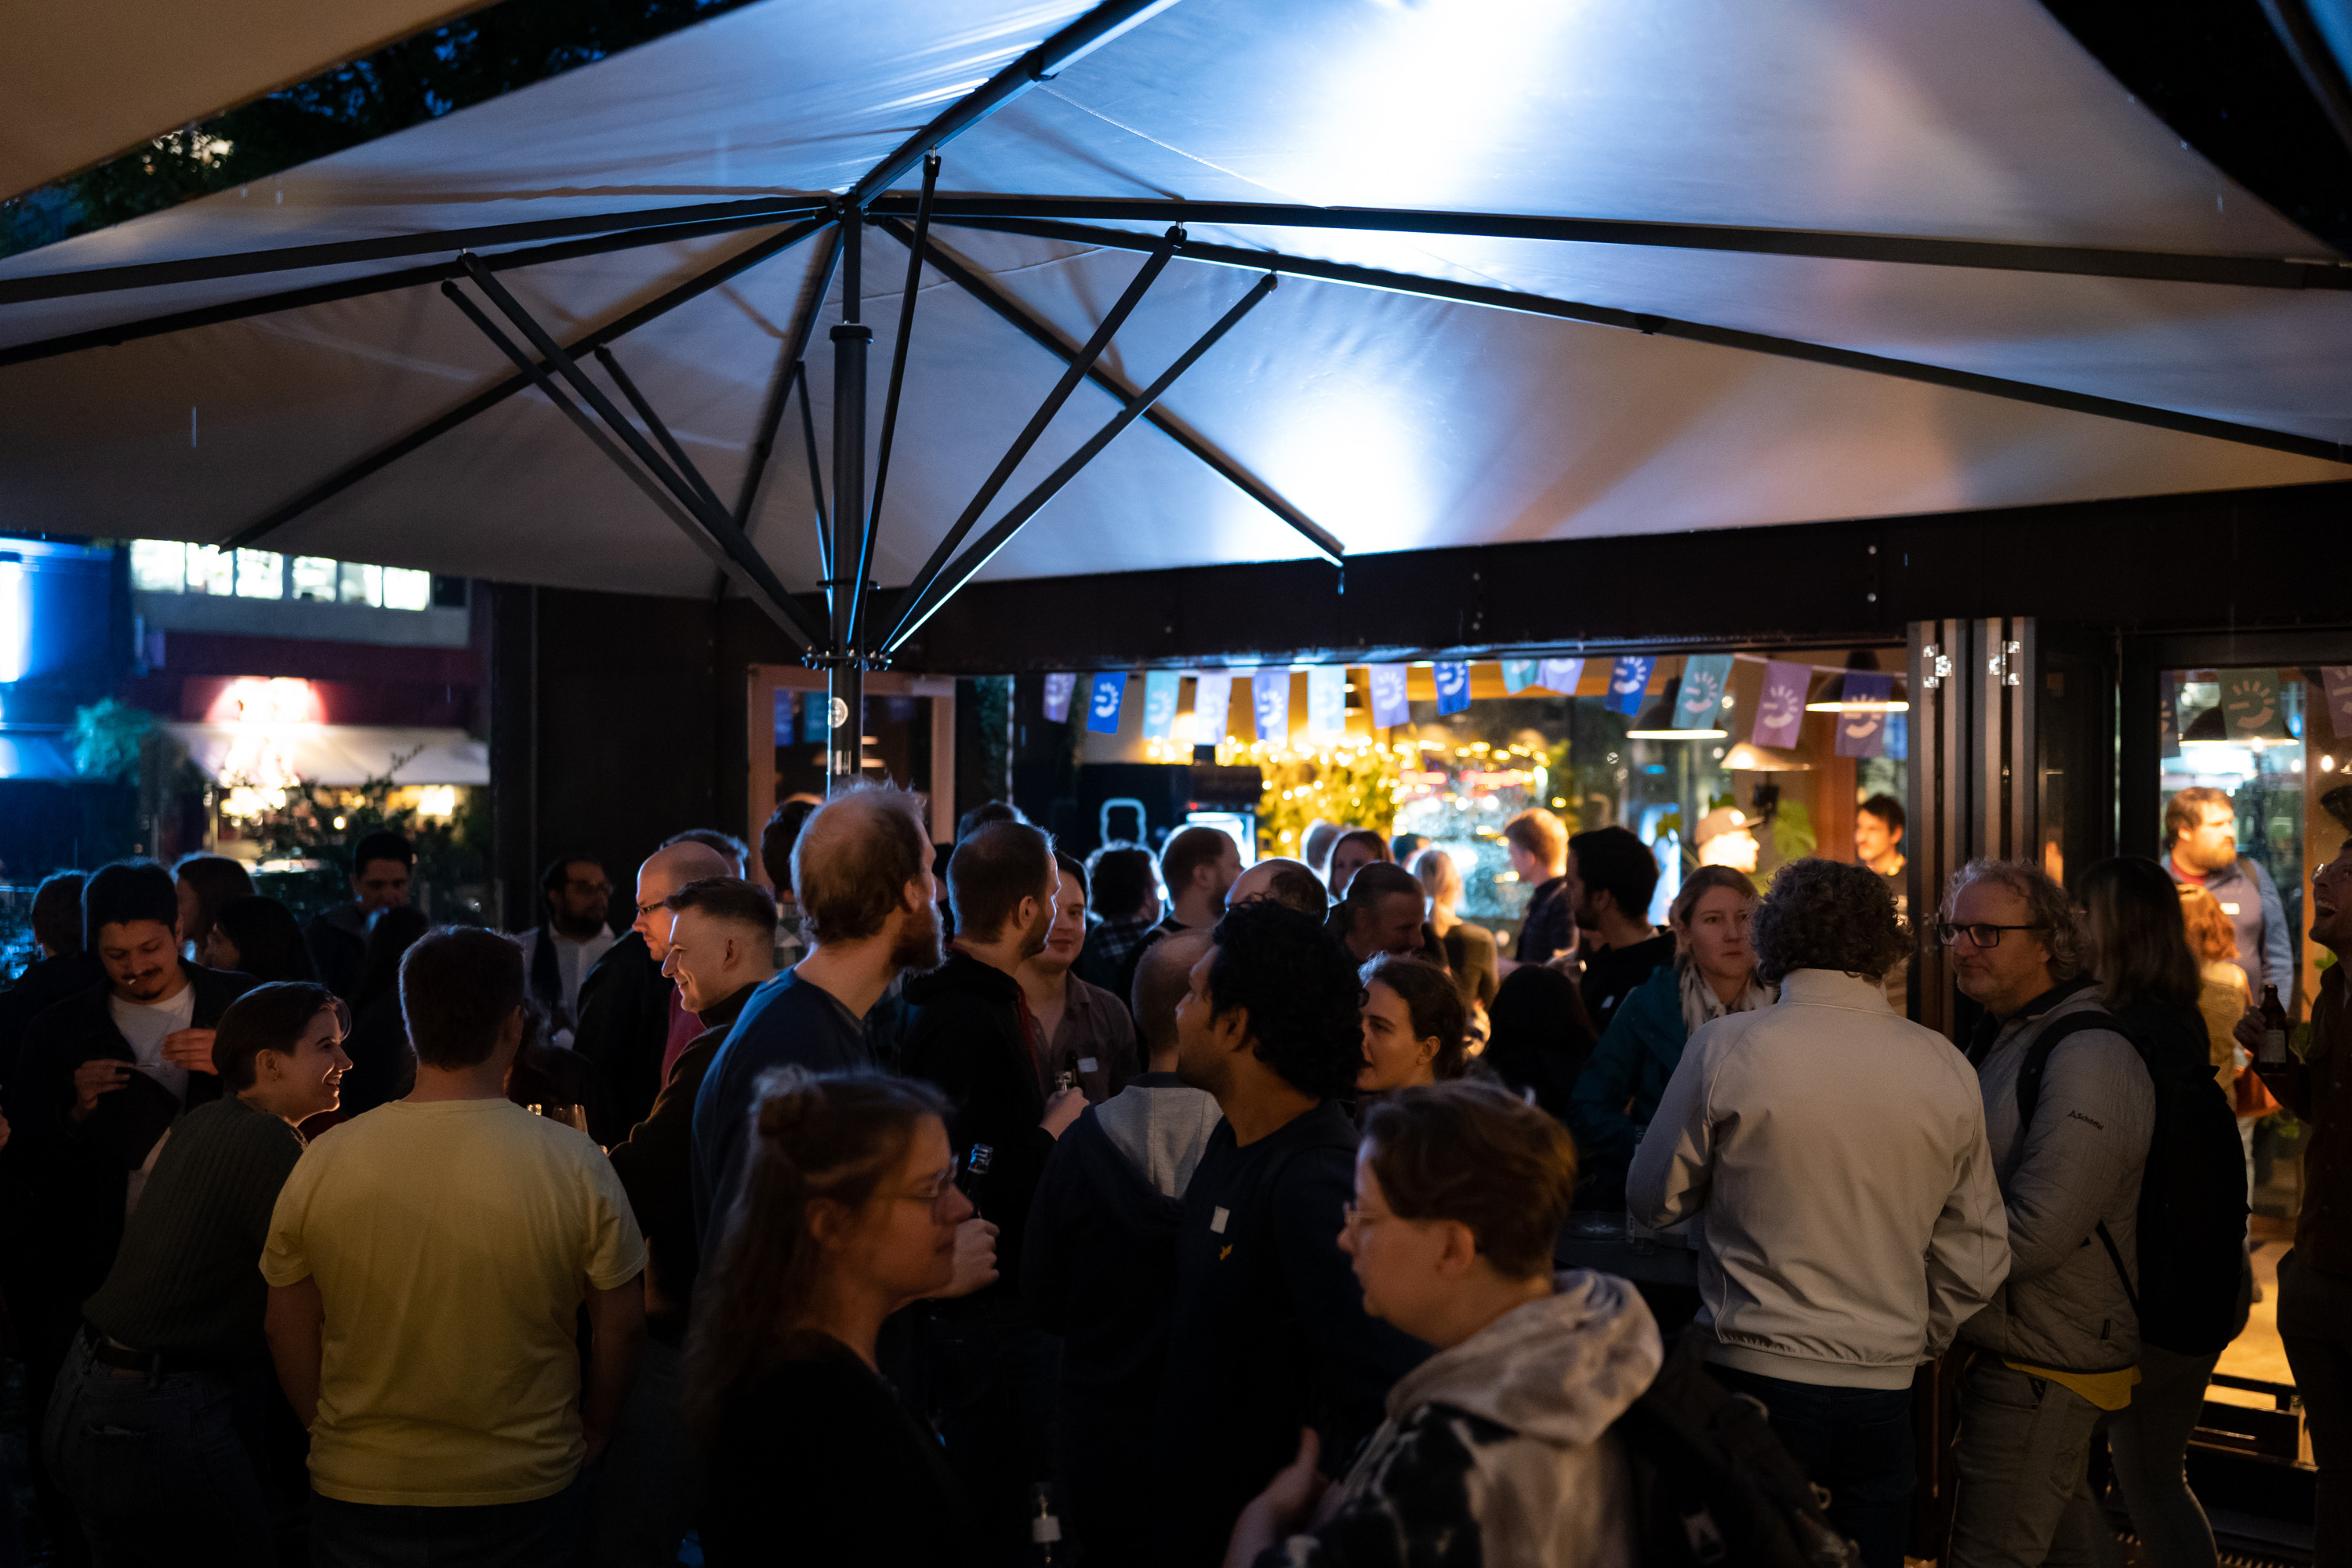 The Gamecity Treff was very well attended, with more than 250 guests